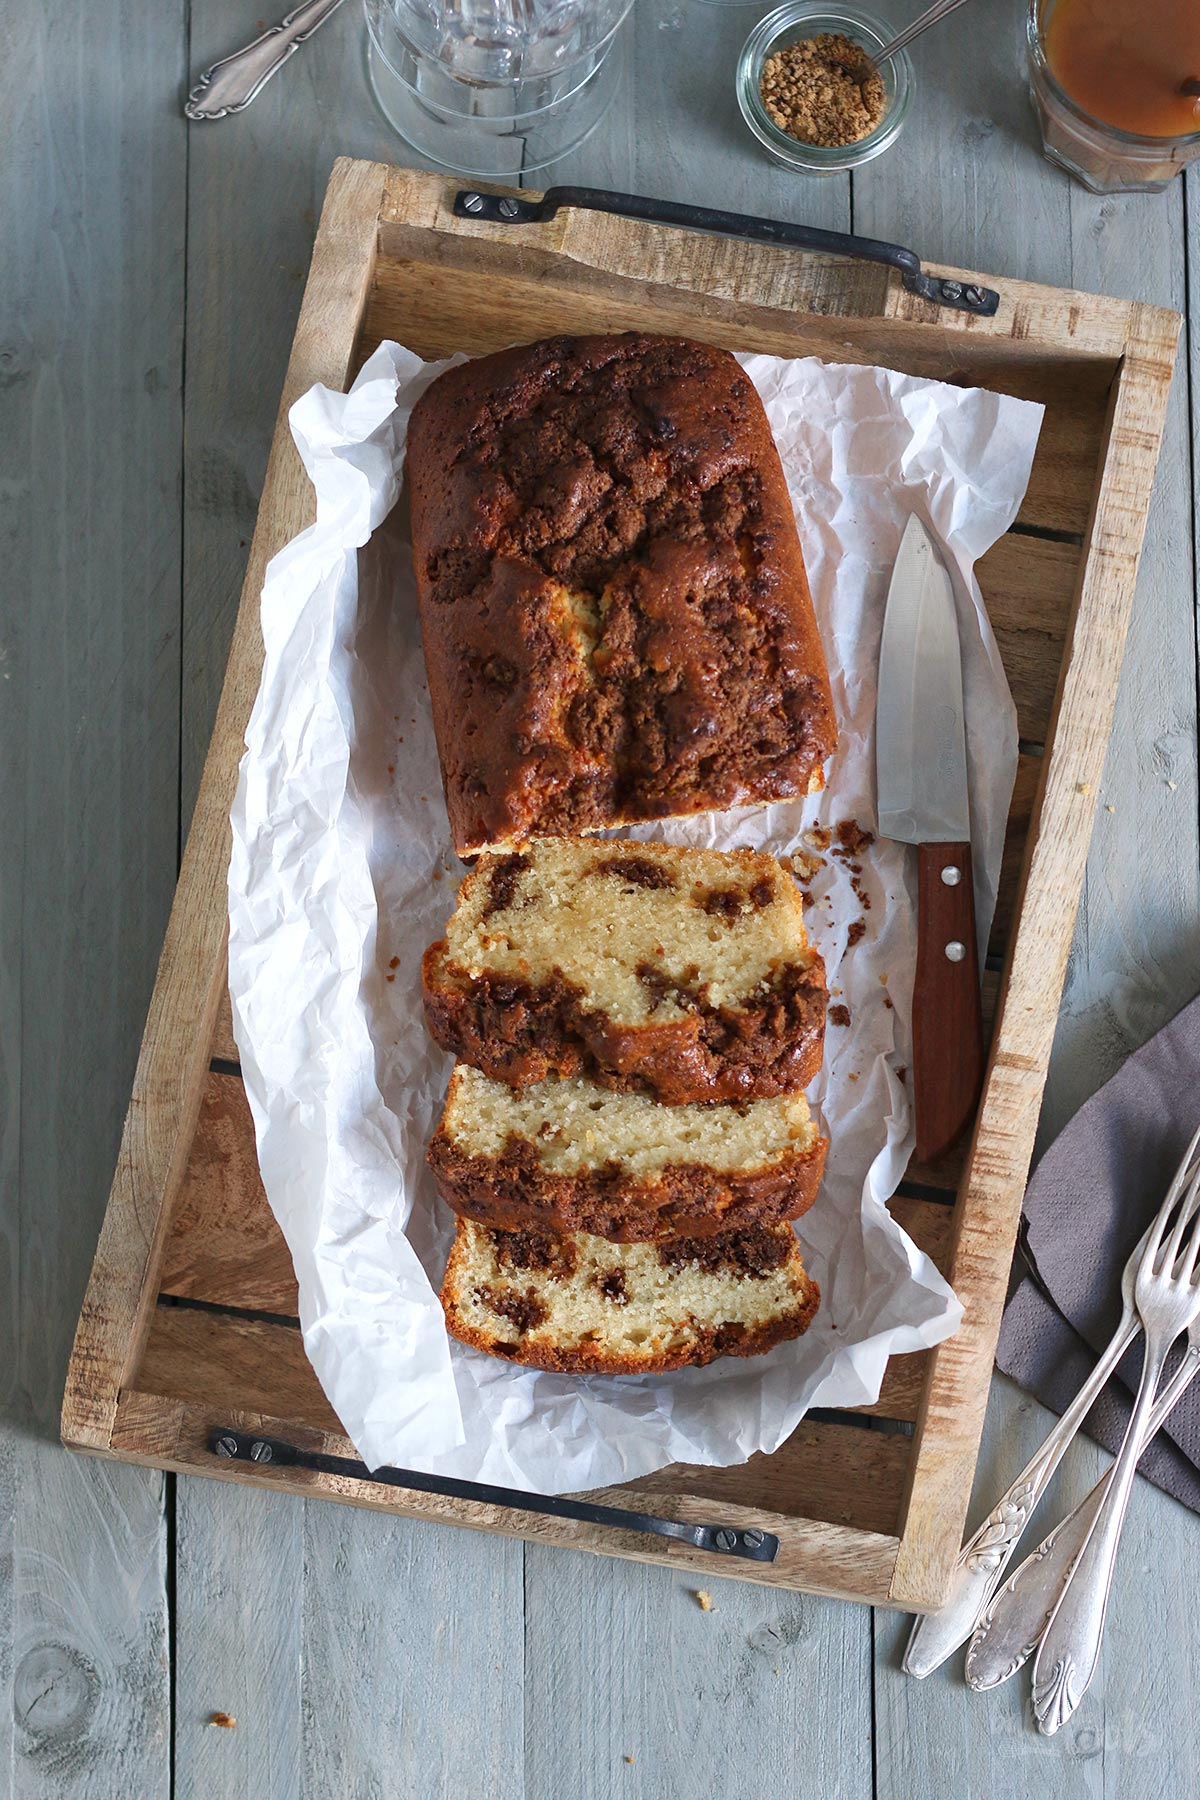 Easy Cinnamon Streusel Loaf Cake | Bake to the roots